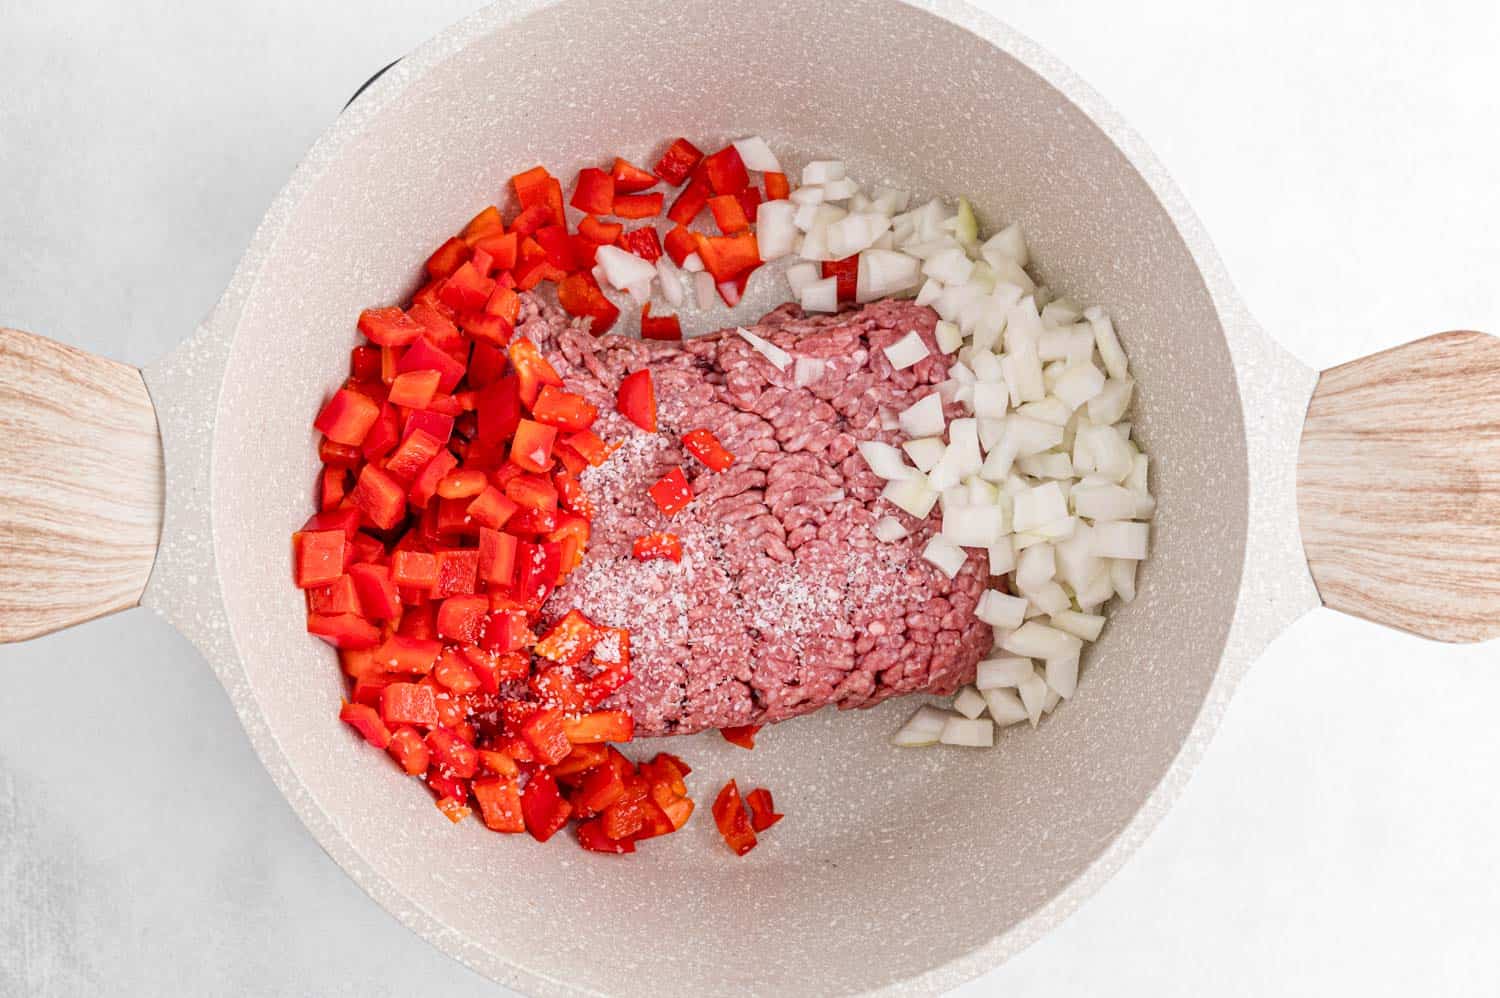 Uncooked beef, peppers, and onions in a white pan.